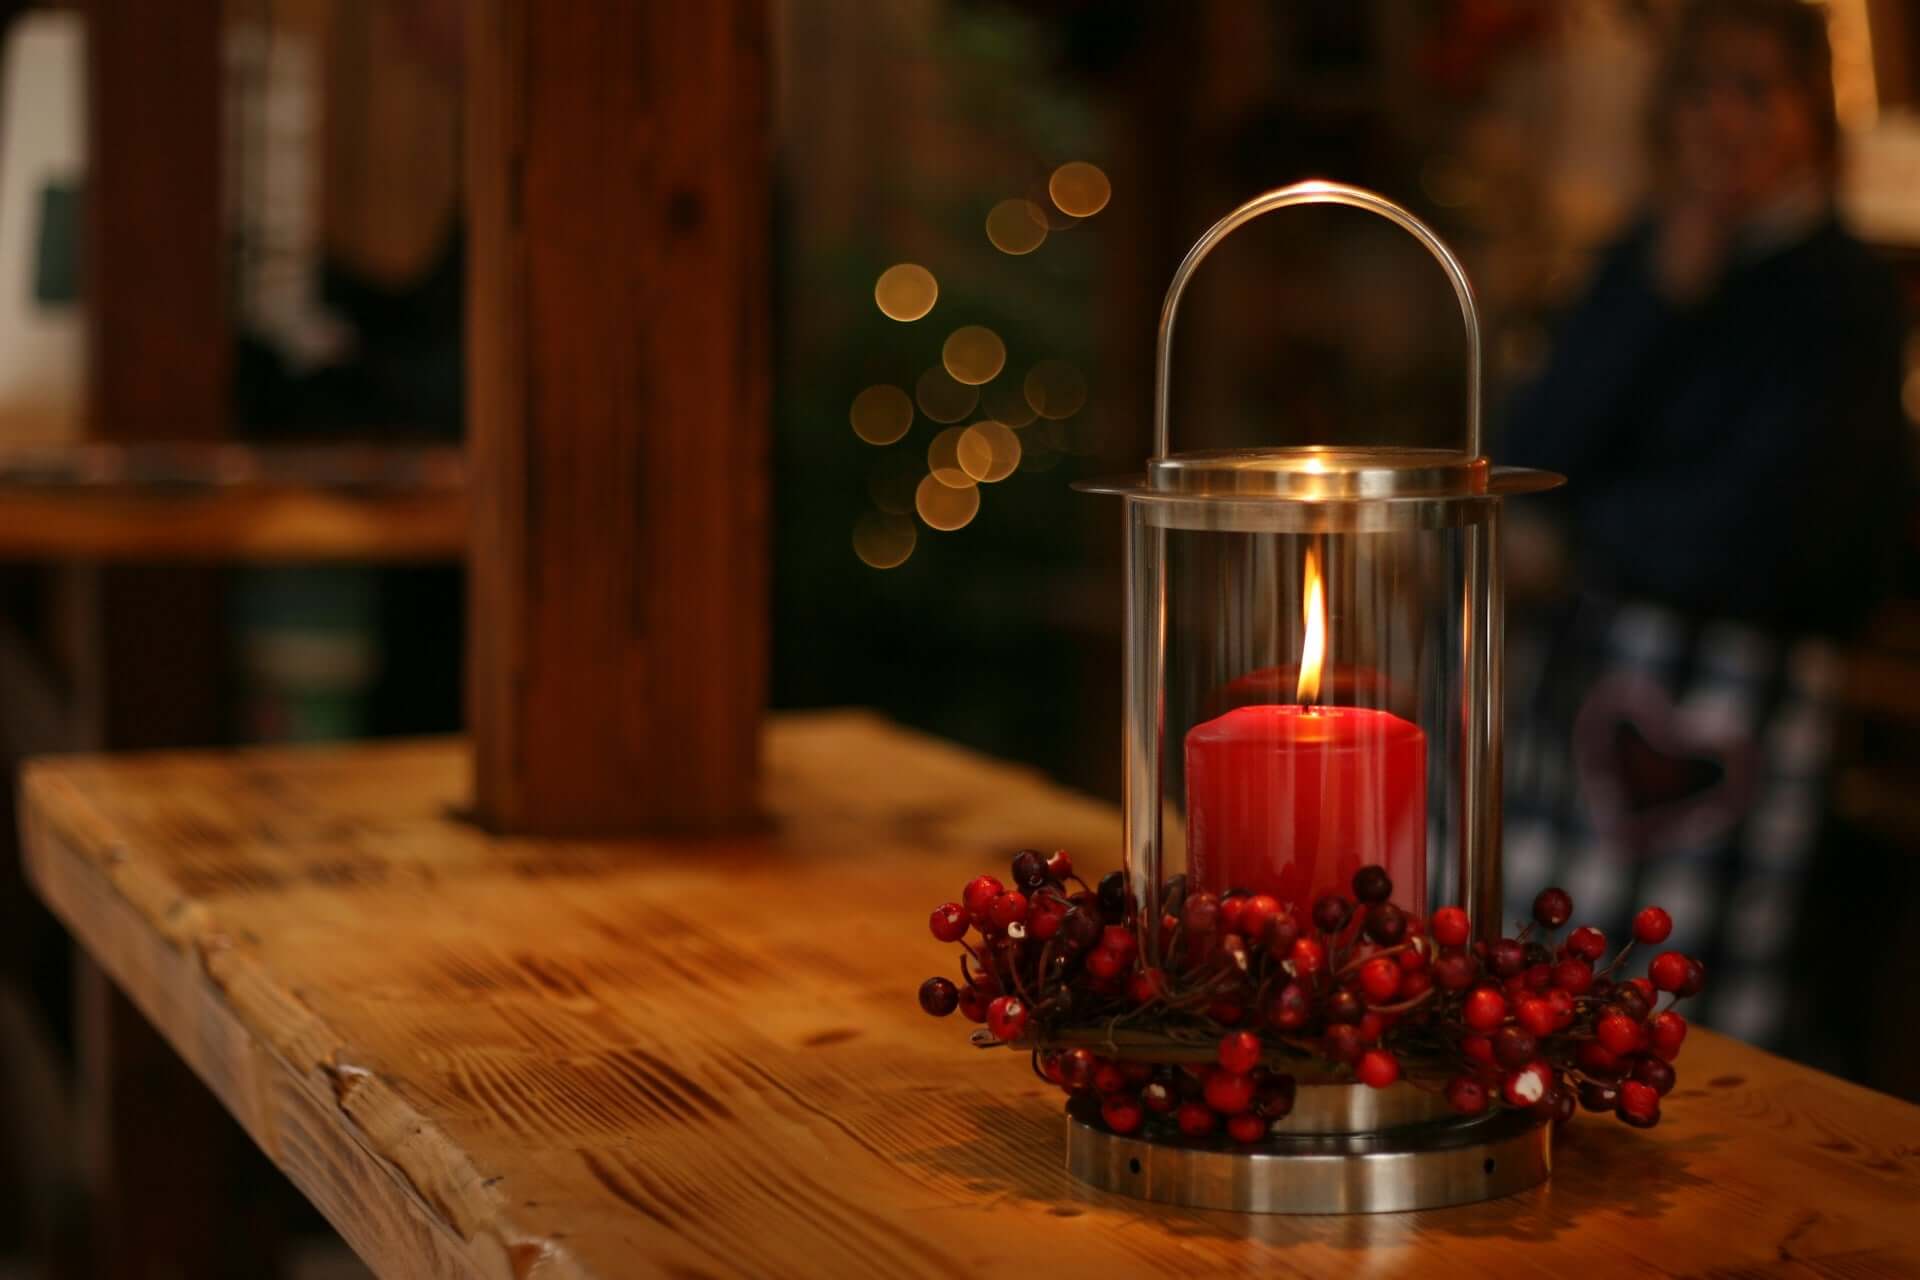 A red candle wreathed in berries sits lit on a countertop.